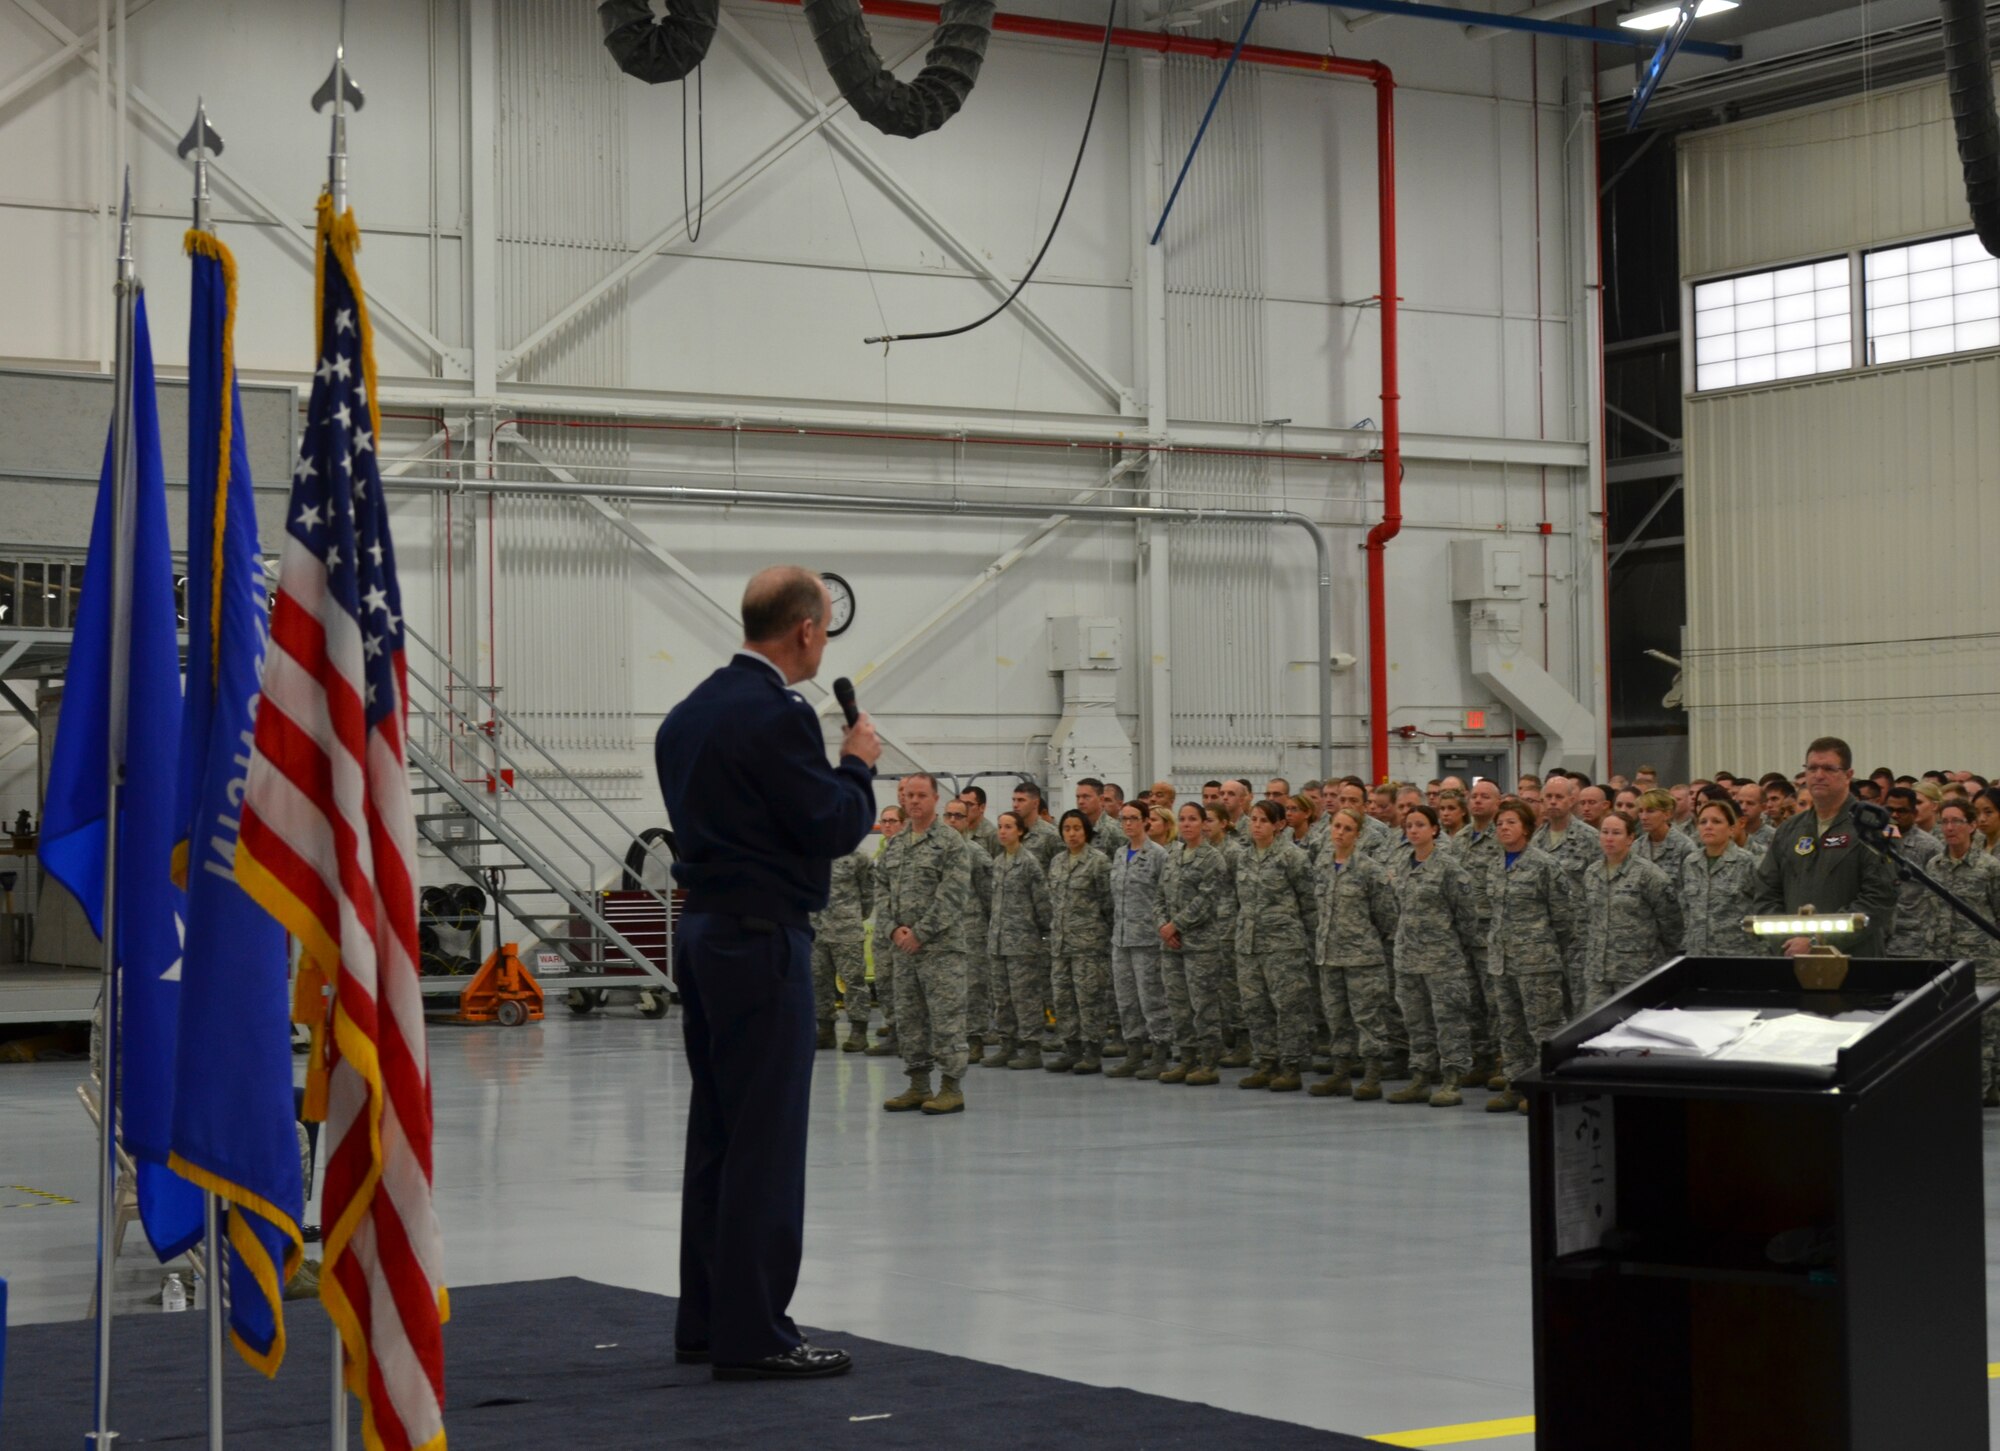 Major General Donald P. Dunbar, Adjutant General of the Wisconsin National Guard, addresses the Airmen of 128th Air Refueling Wing during a formal ceremony presenting the Air Force Outstanding Unit Award Oct. 2, 2016 at General Mitchell Airfield, Milwaukee. This award marks the seventh time the 128 ARW has received the AFOUA in recognition of distinguished meritorious service from Oct. 1, 2014 through Sept. 30, 2015. (Air National Guard photo by Tech. Sgt. Meghan Skrepenski, 128 ARW Public Affairs/Released)